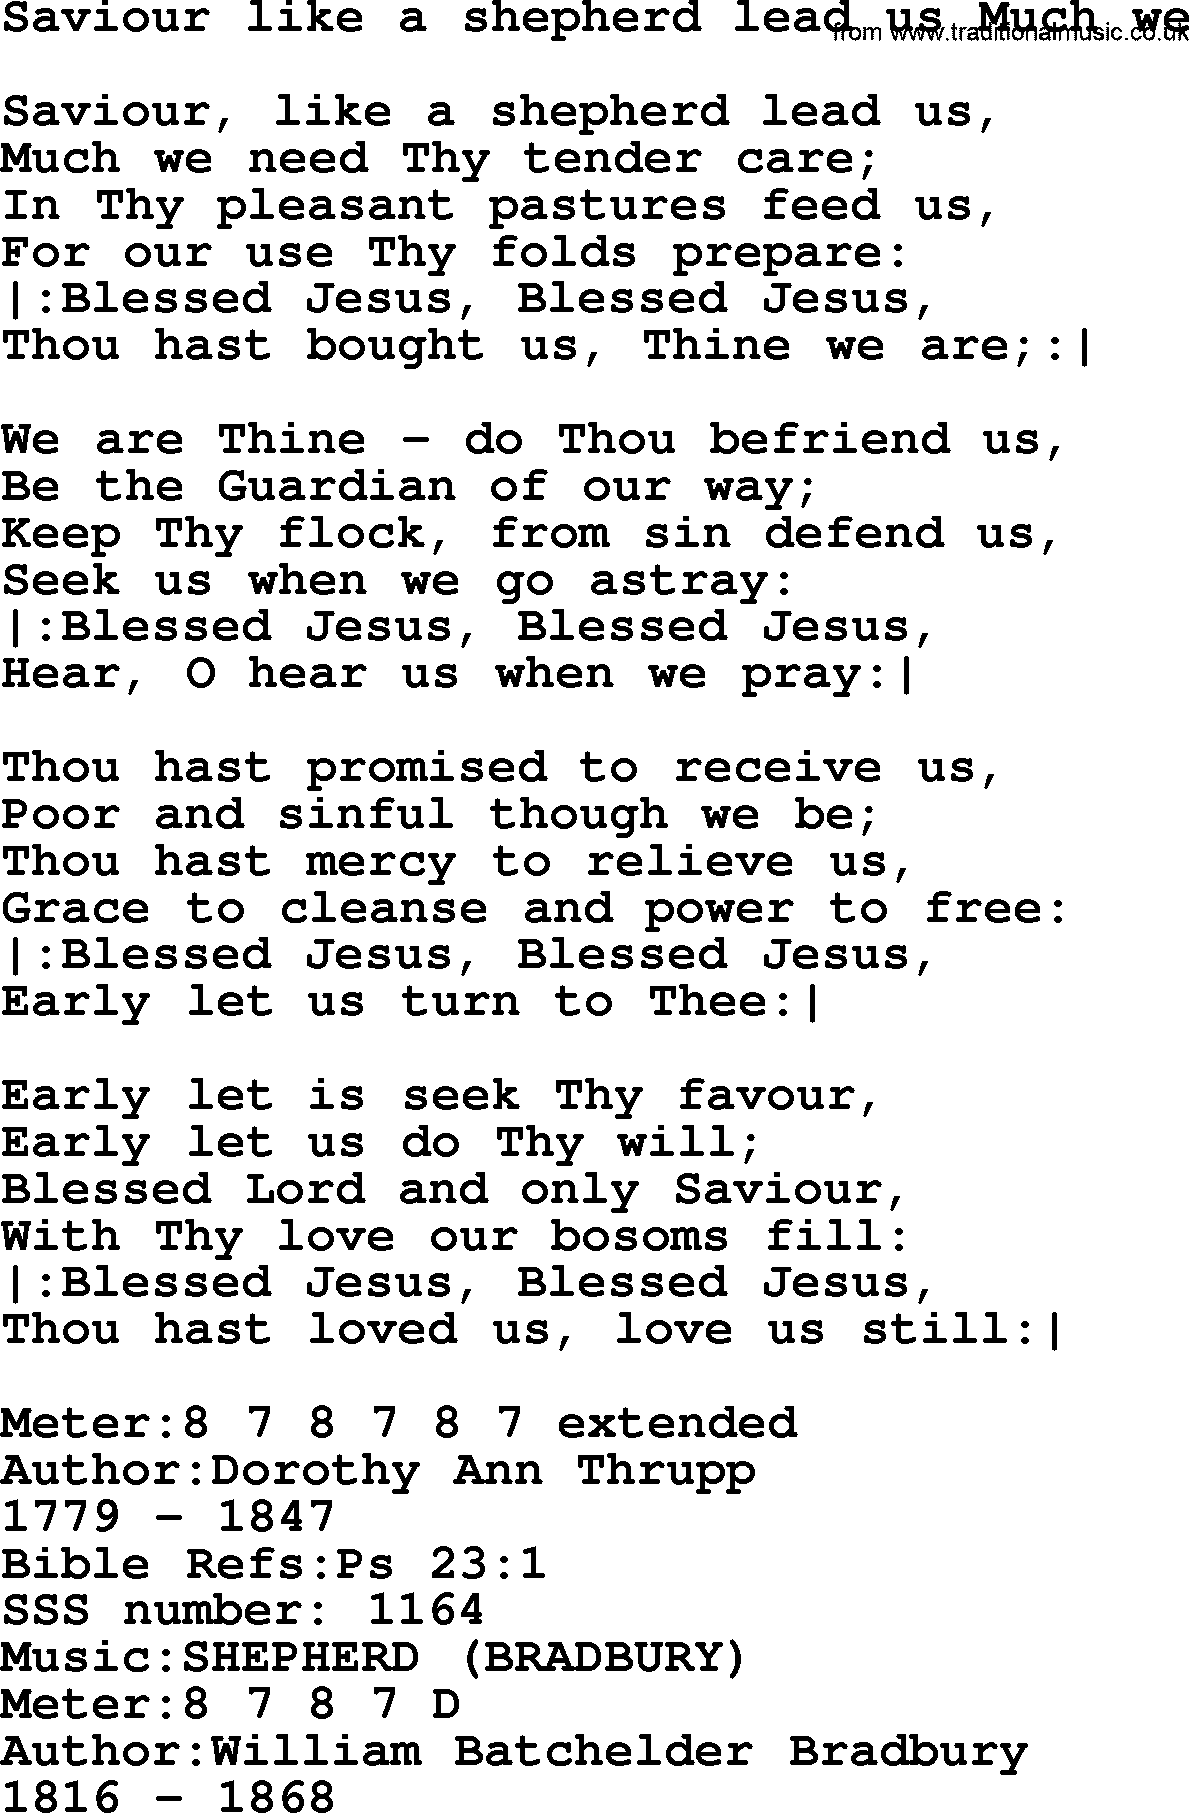 Sacred Songs and Solos complete, 1200 Hymns, title: Saviour Like A Shepherd Lead Us Much We, lyrics and PDF